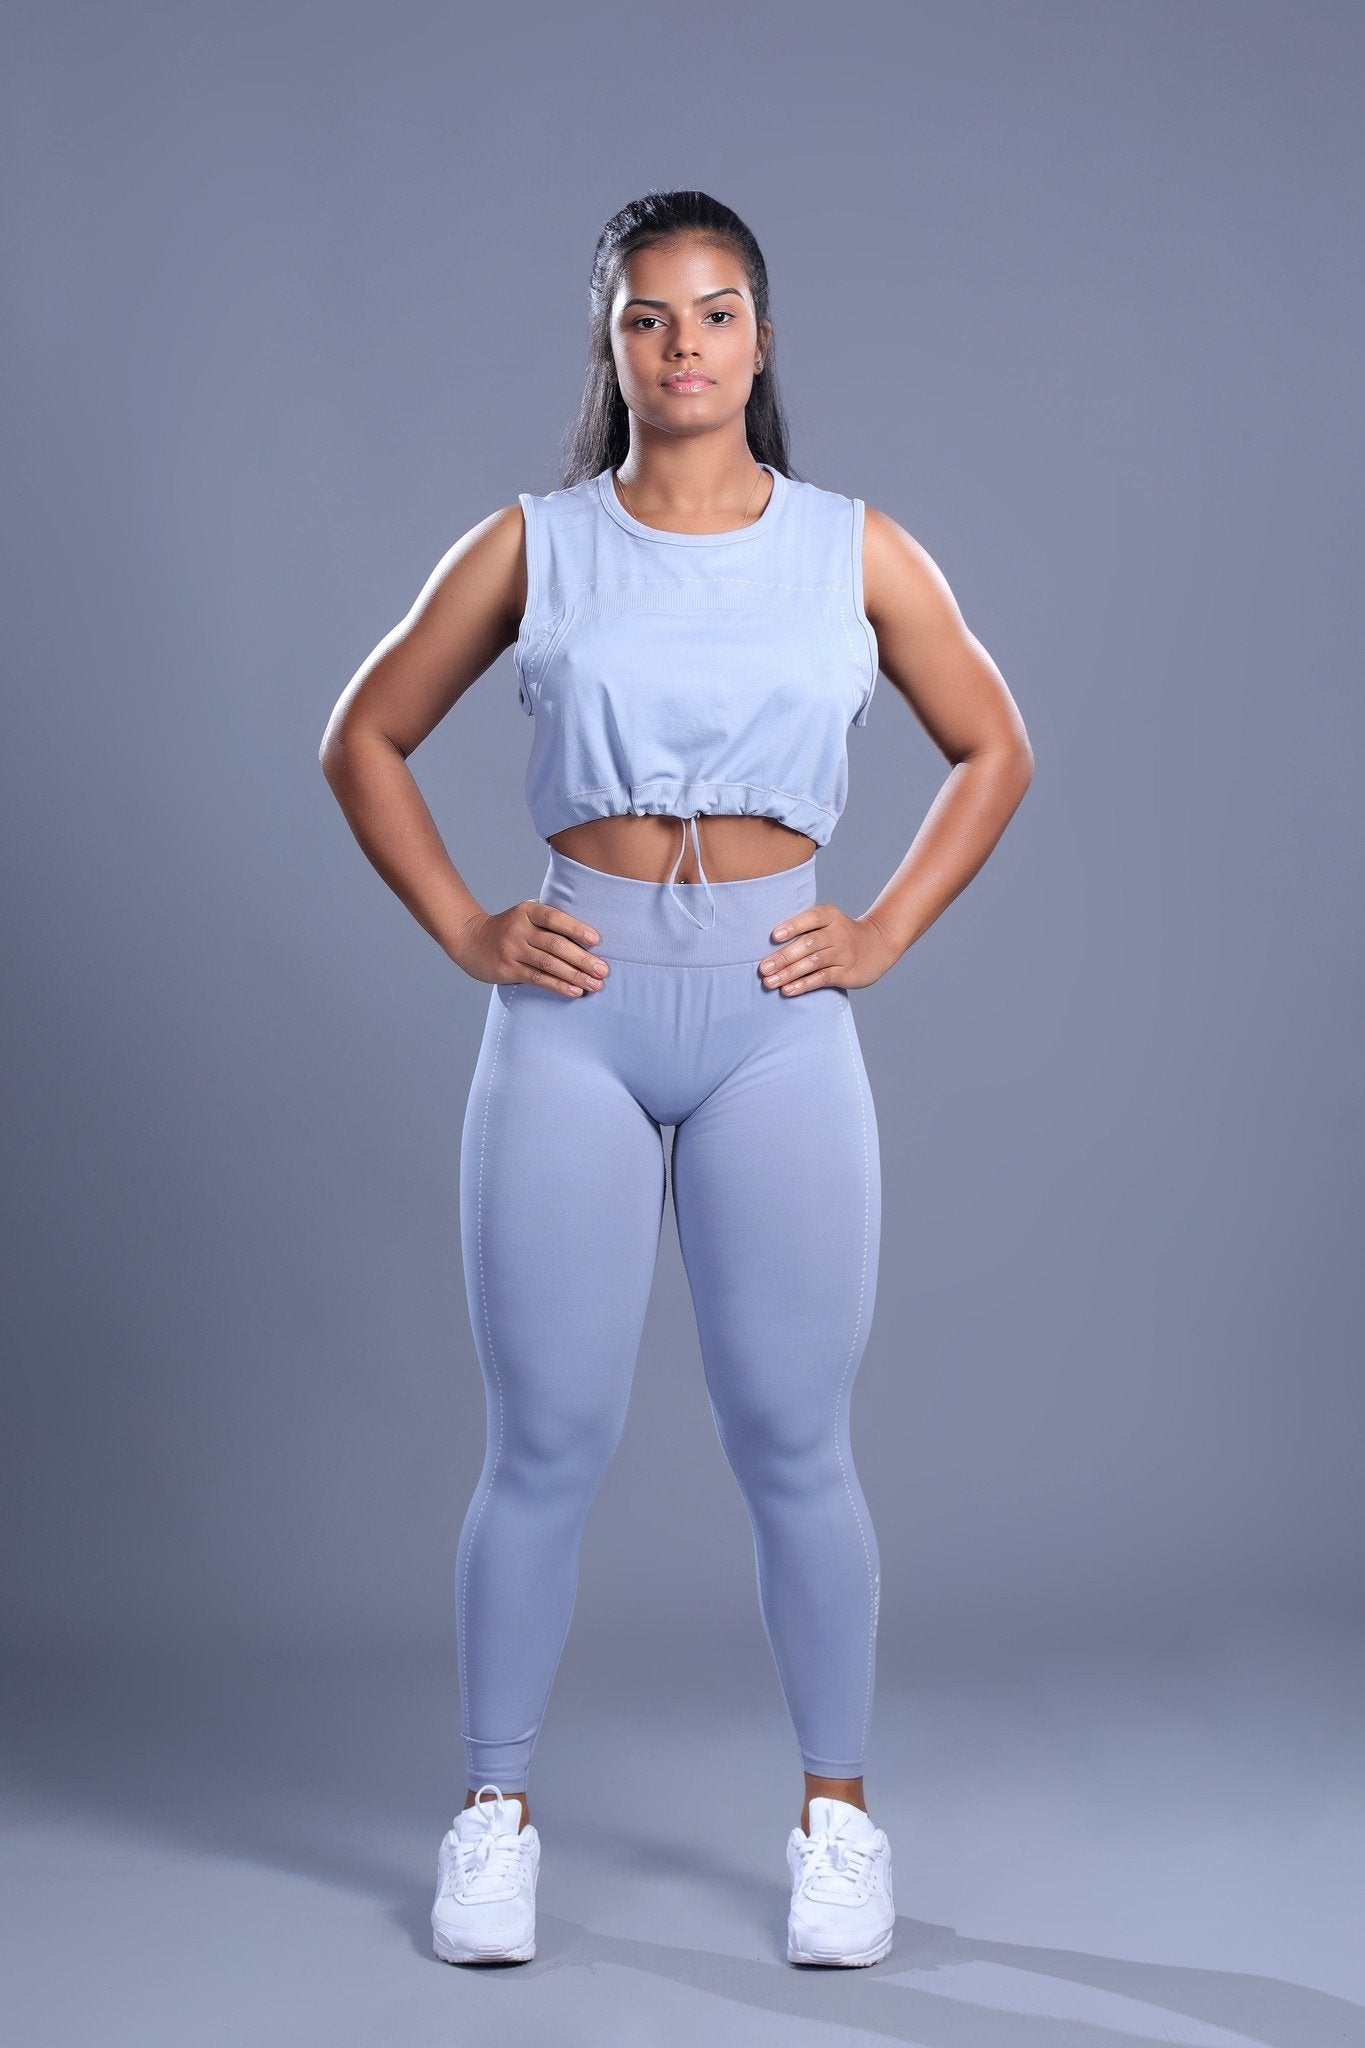 OBSESSION LIGHTWEIGHT SEAMLESS CROP TOP - LAVENDER BLUE - CanelaFitness